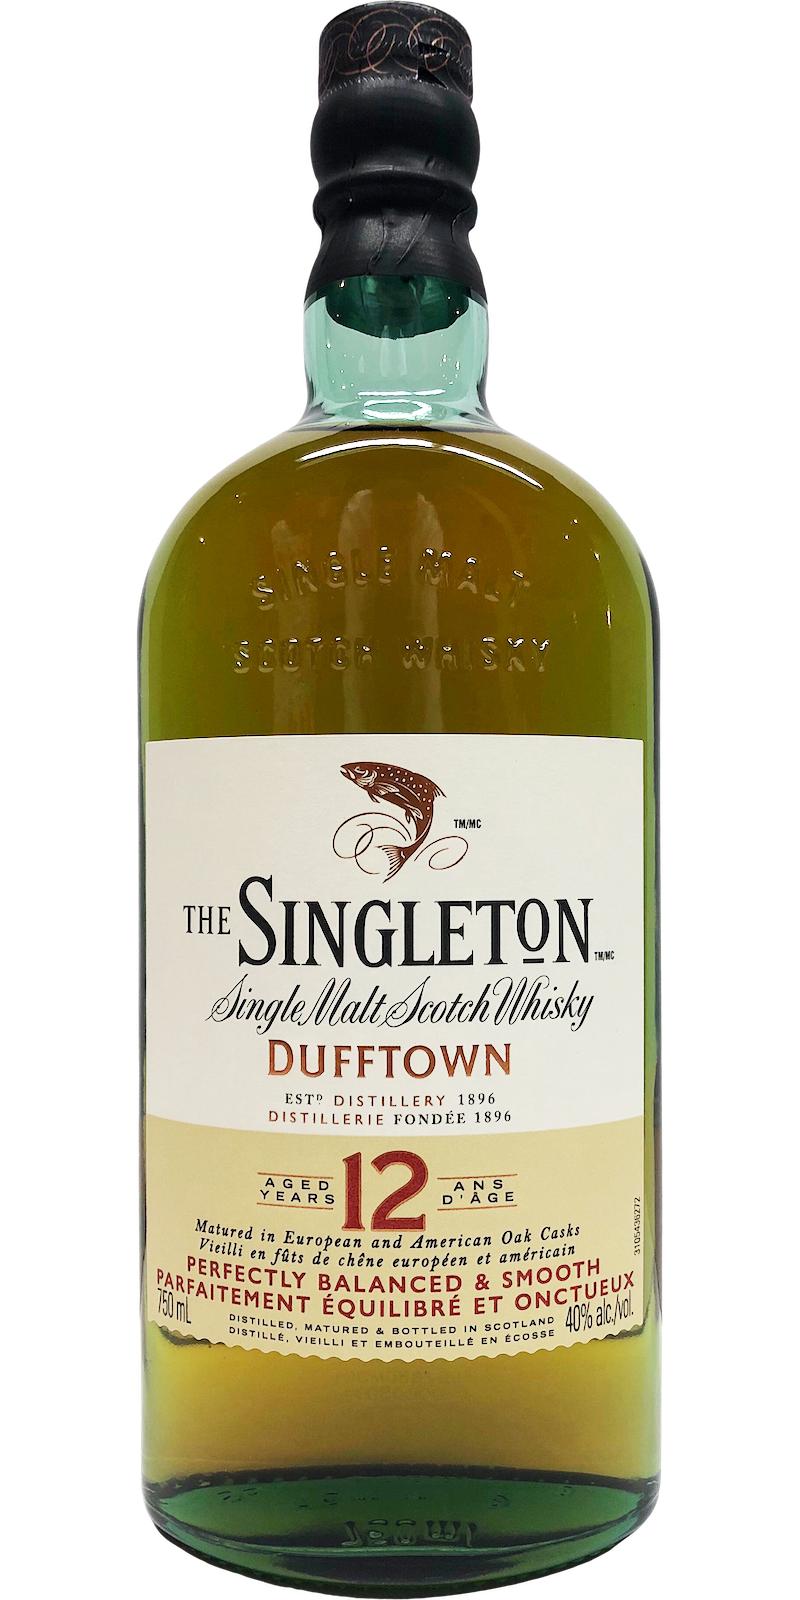 The Singleton of Dufftown 12-year-old - Ratings and reviews - Whiskybase